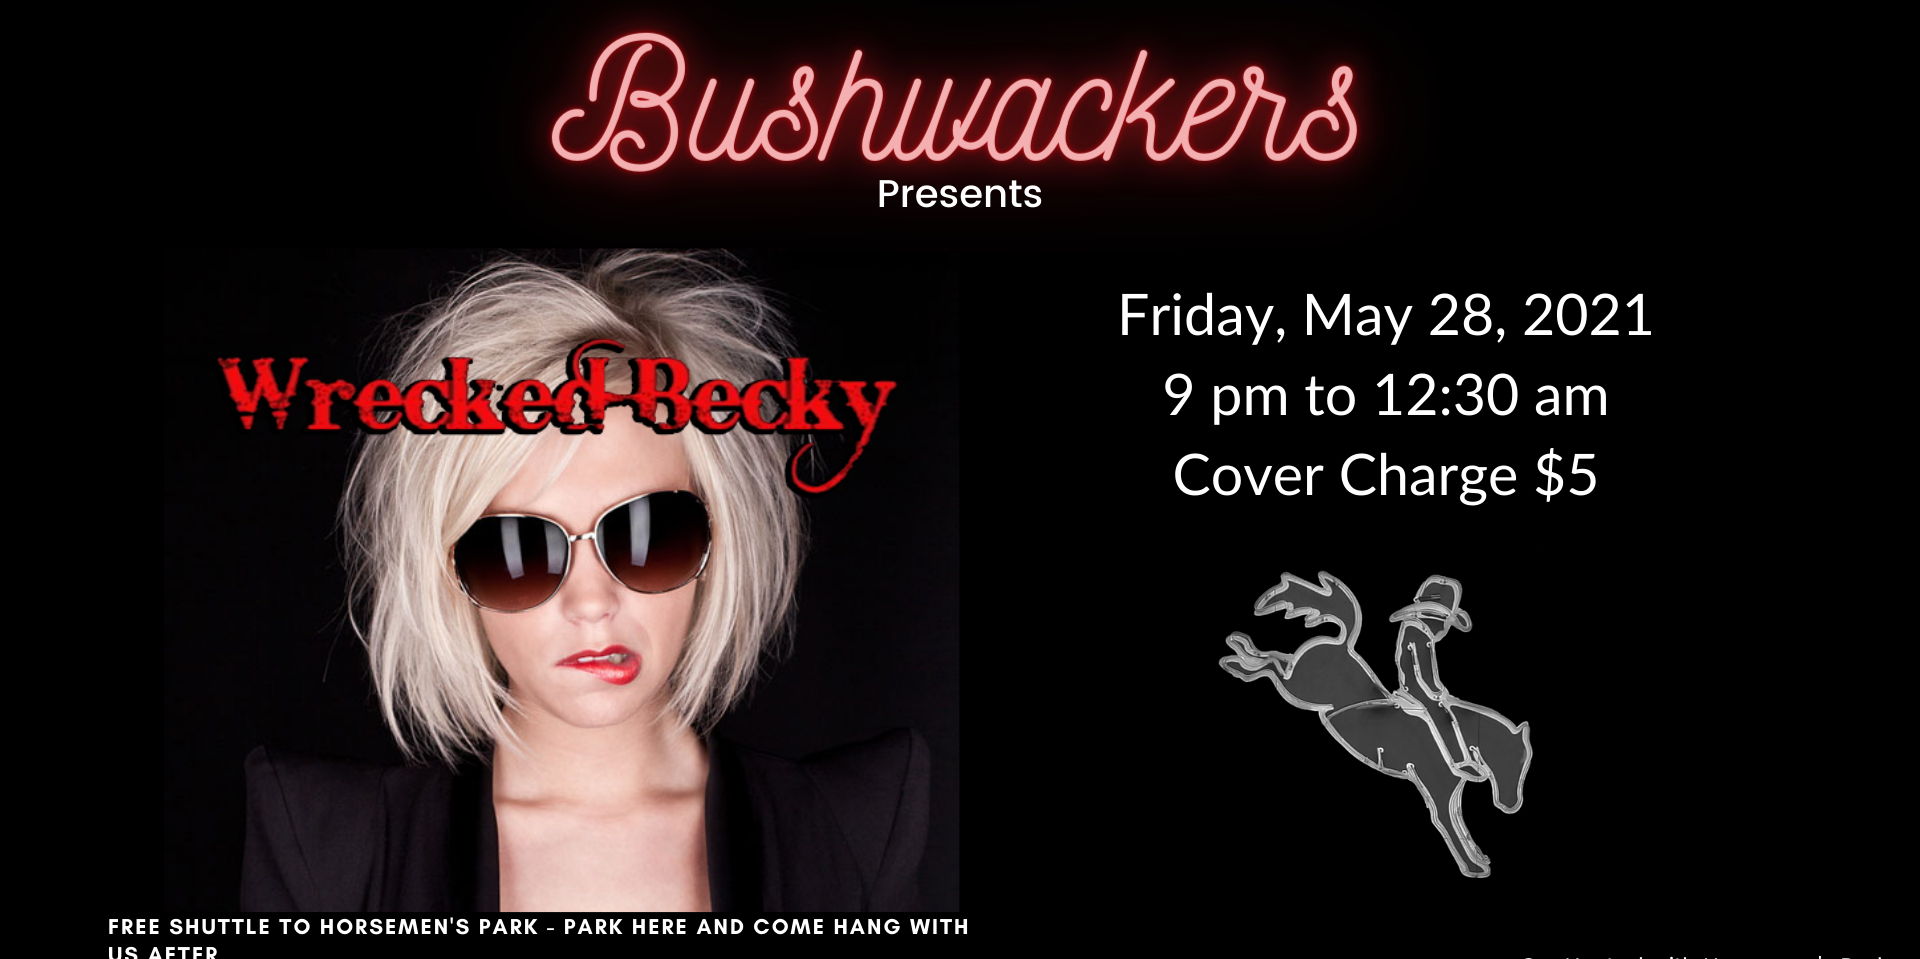 Wrecked Becky at Bushwackers! promotional image